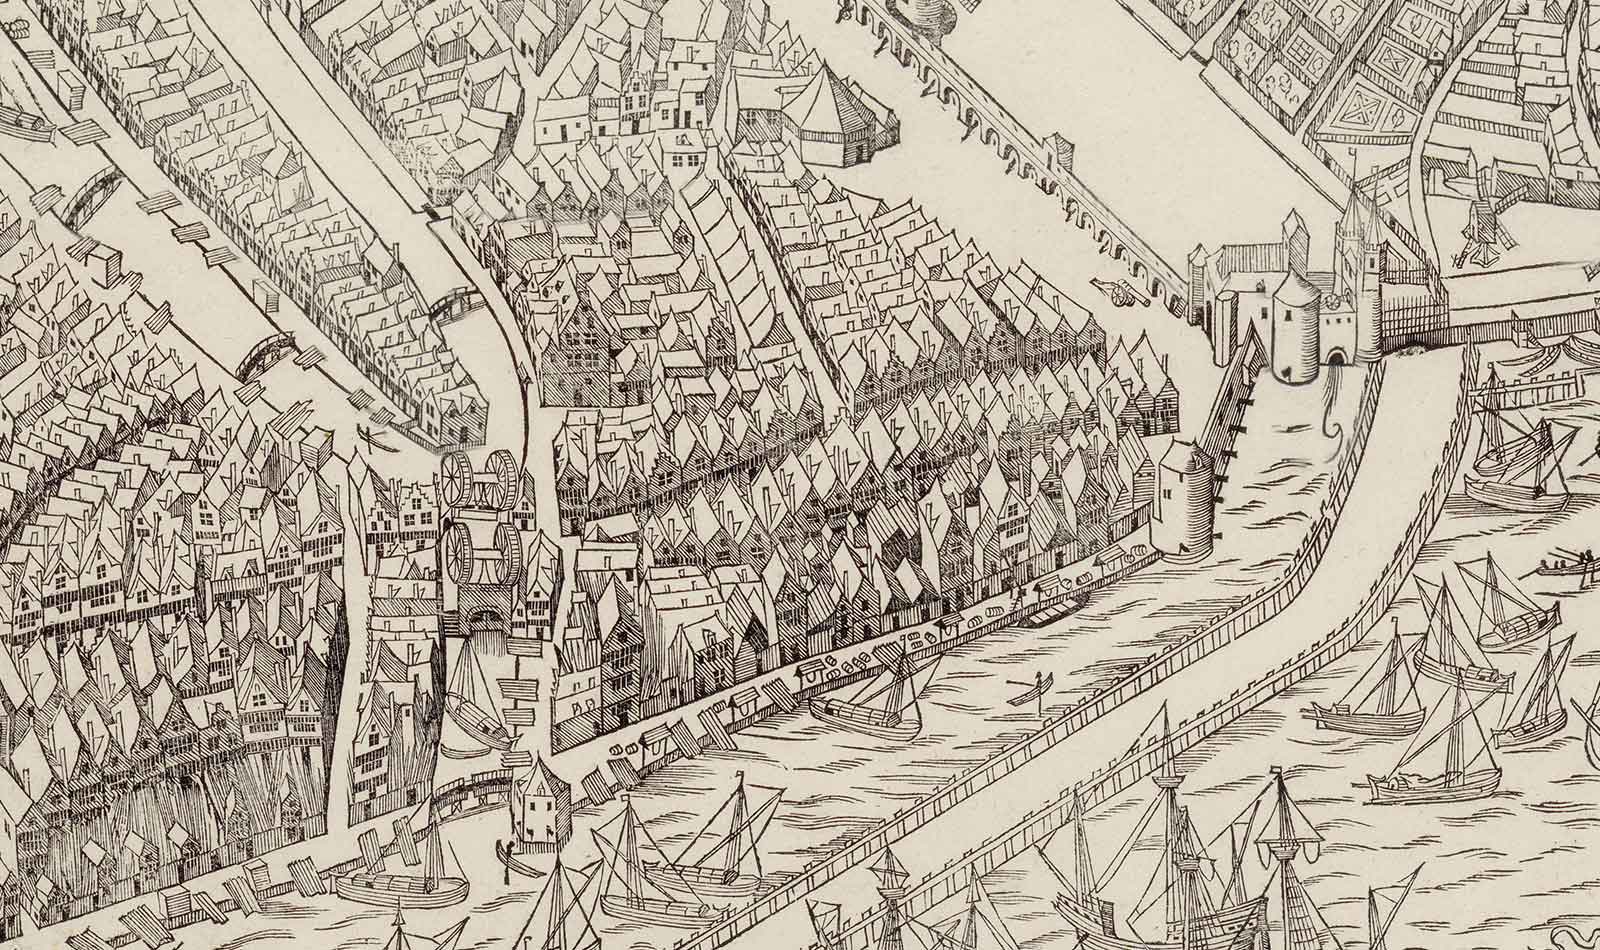 The first and second Haarlemmerpoort in Amsterdam, detail of a map from 1538 by Cornelis Anthonisz